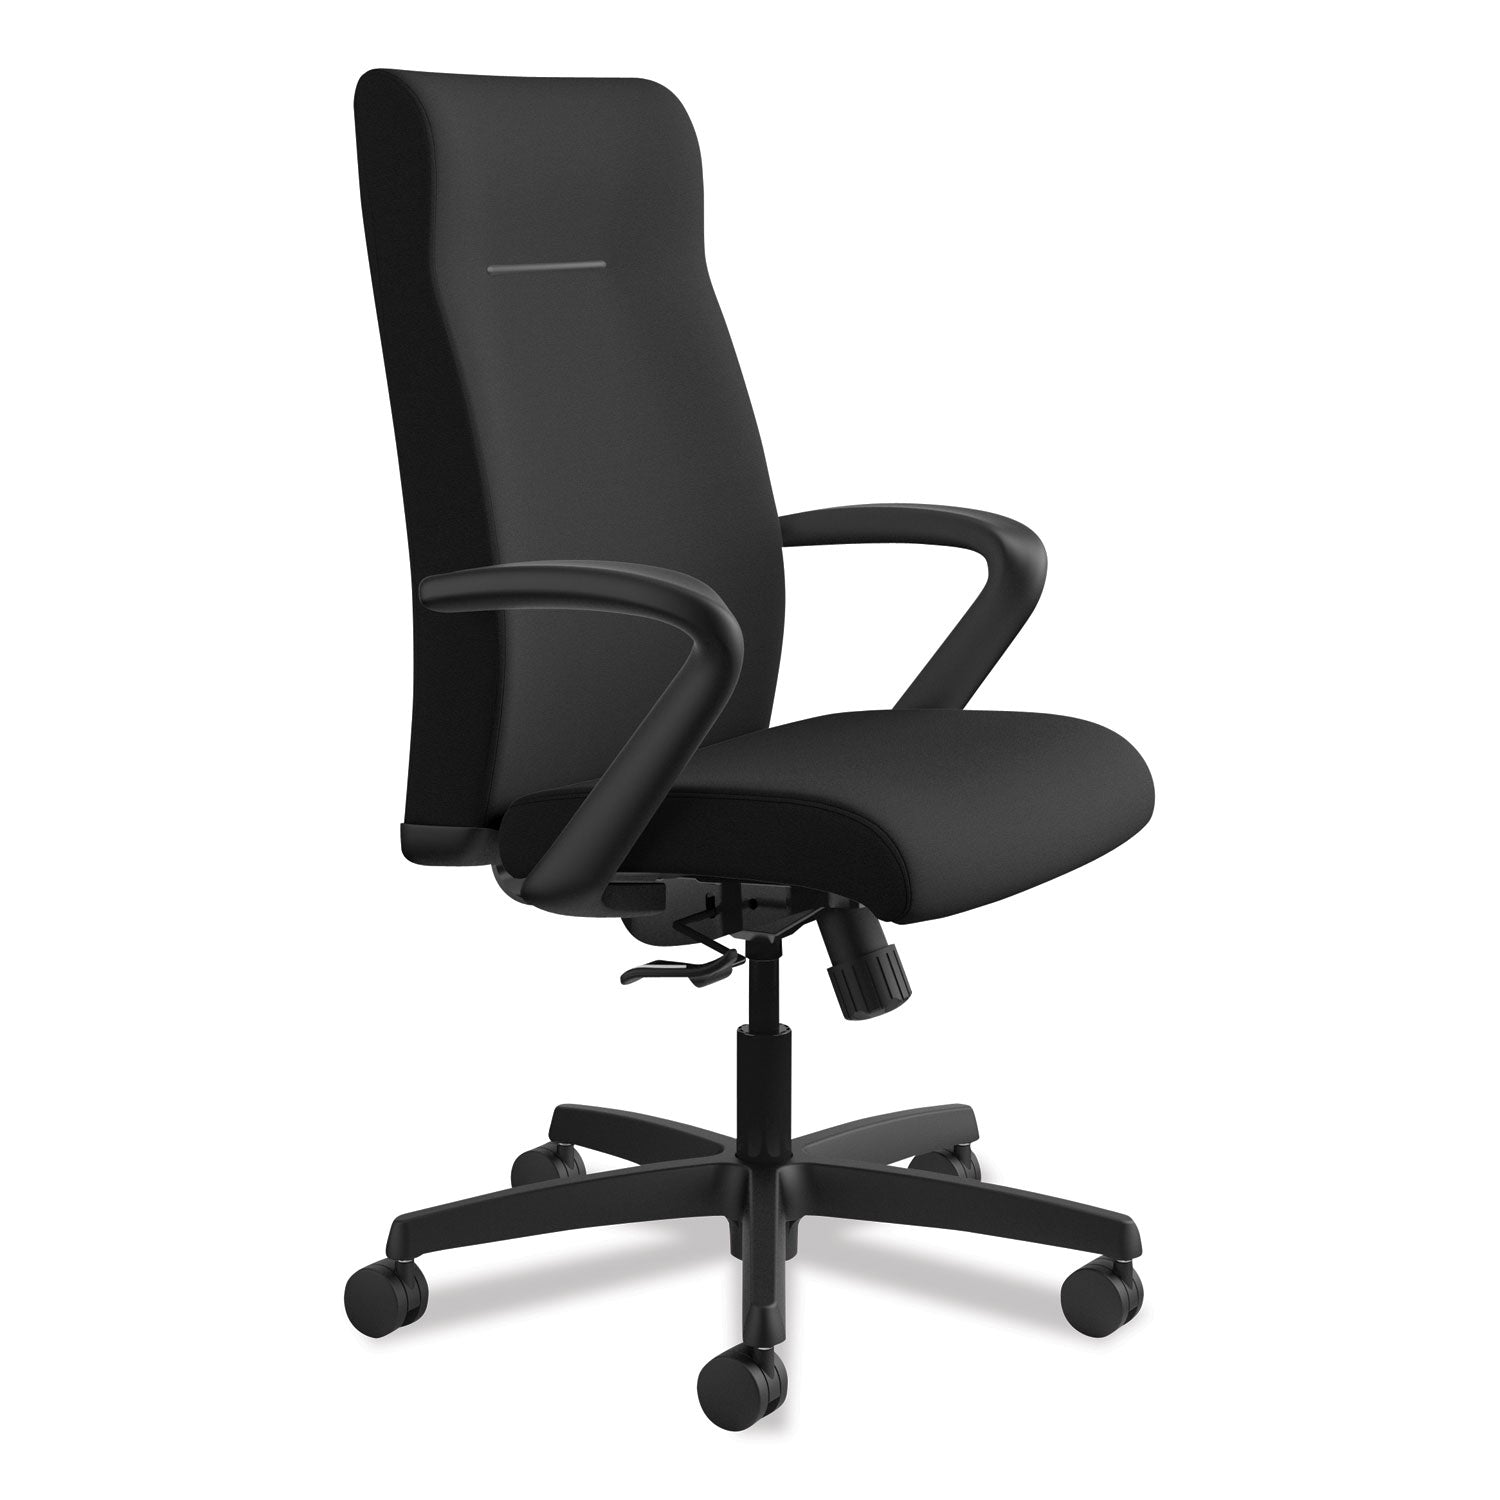 ignition-series-executive-high-back-chair-supports-up-to-300-lb-17-to-21-seat-height-black_honie102cu10 - 2